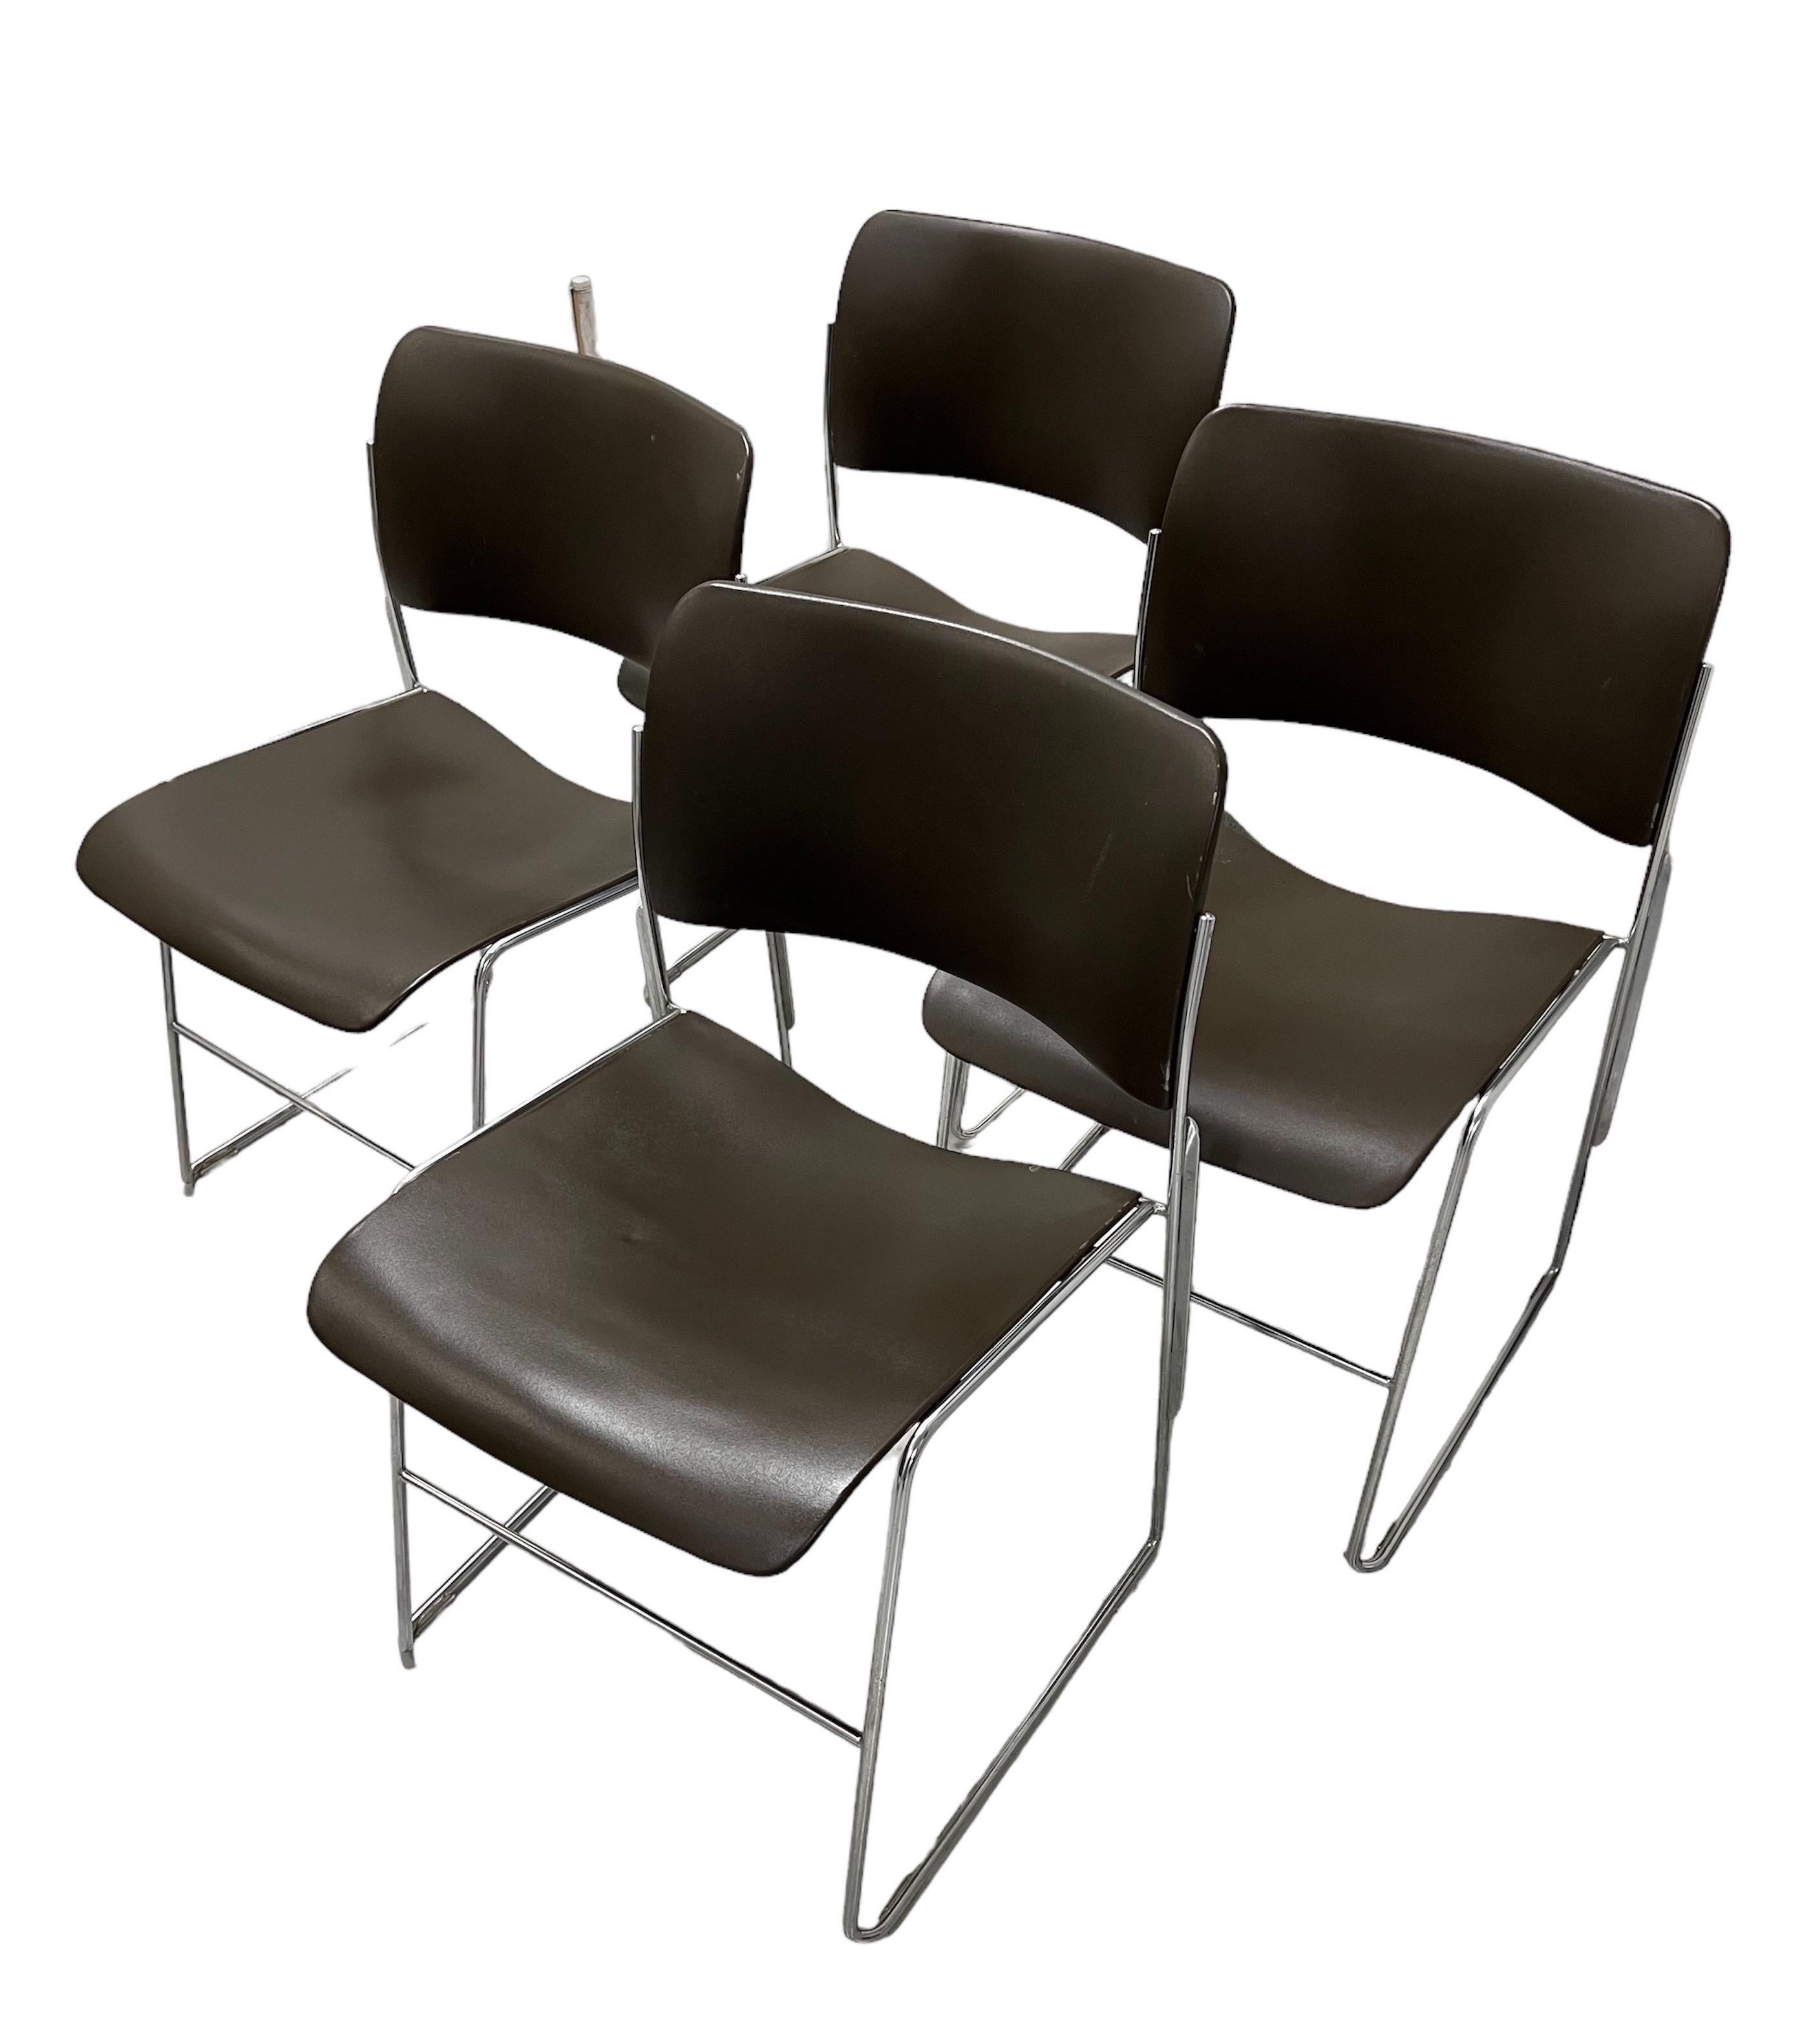 Set of 4 Stackable 40/4 Chairs By David Rowland in Dark Brown In Good Condition For Sale In New York, NY